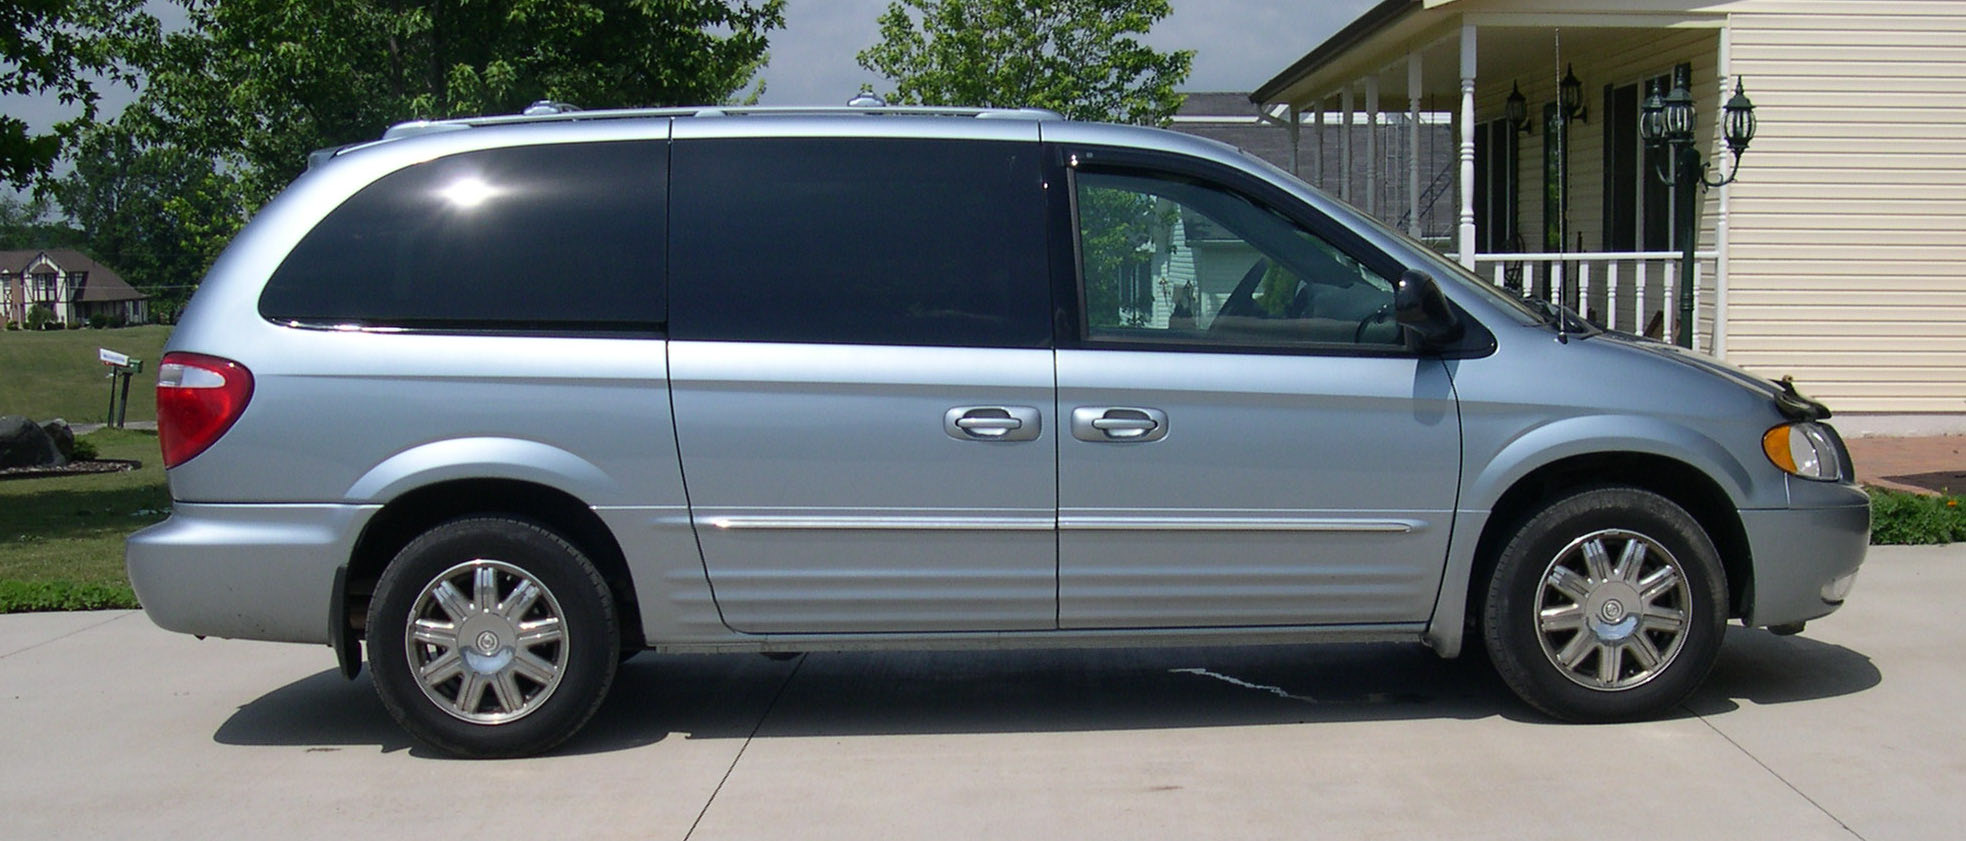 Chrysler Town and Country 2005 #2